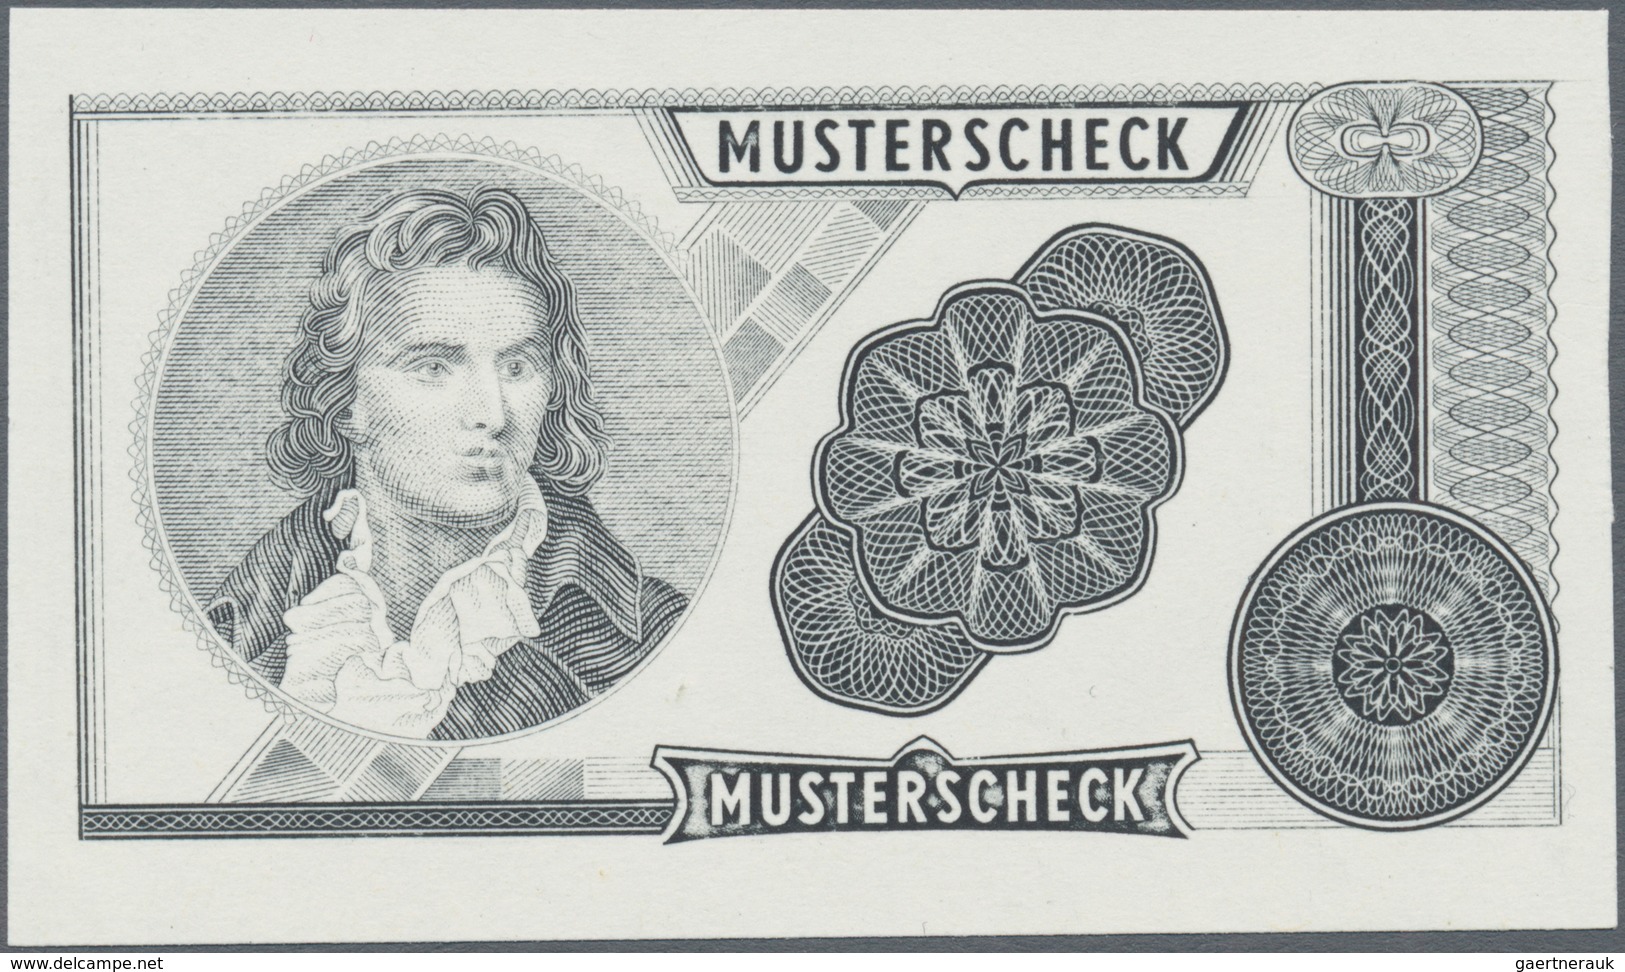 02651 Testbanknoten: Test Note / Test Print Drent Goebel, Germany, Small Size Note (about 7x4cm) With Both - Specimen